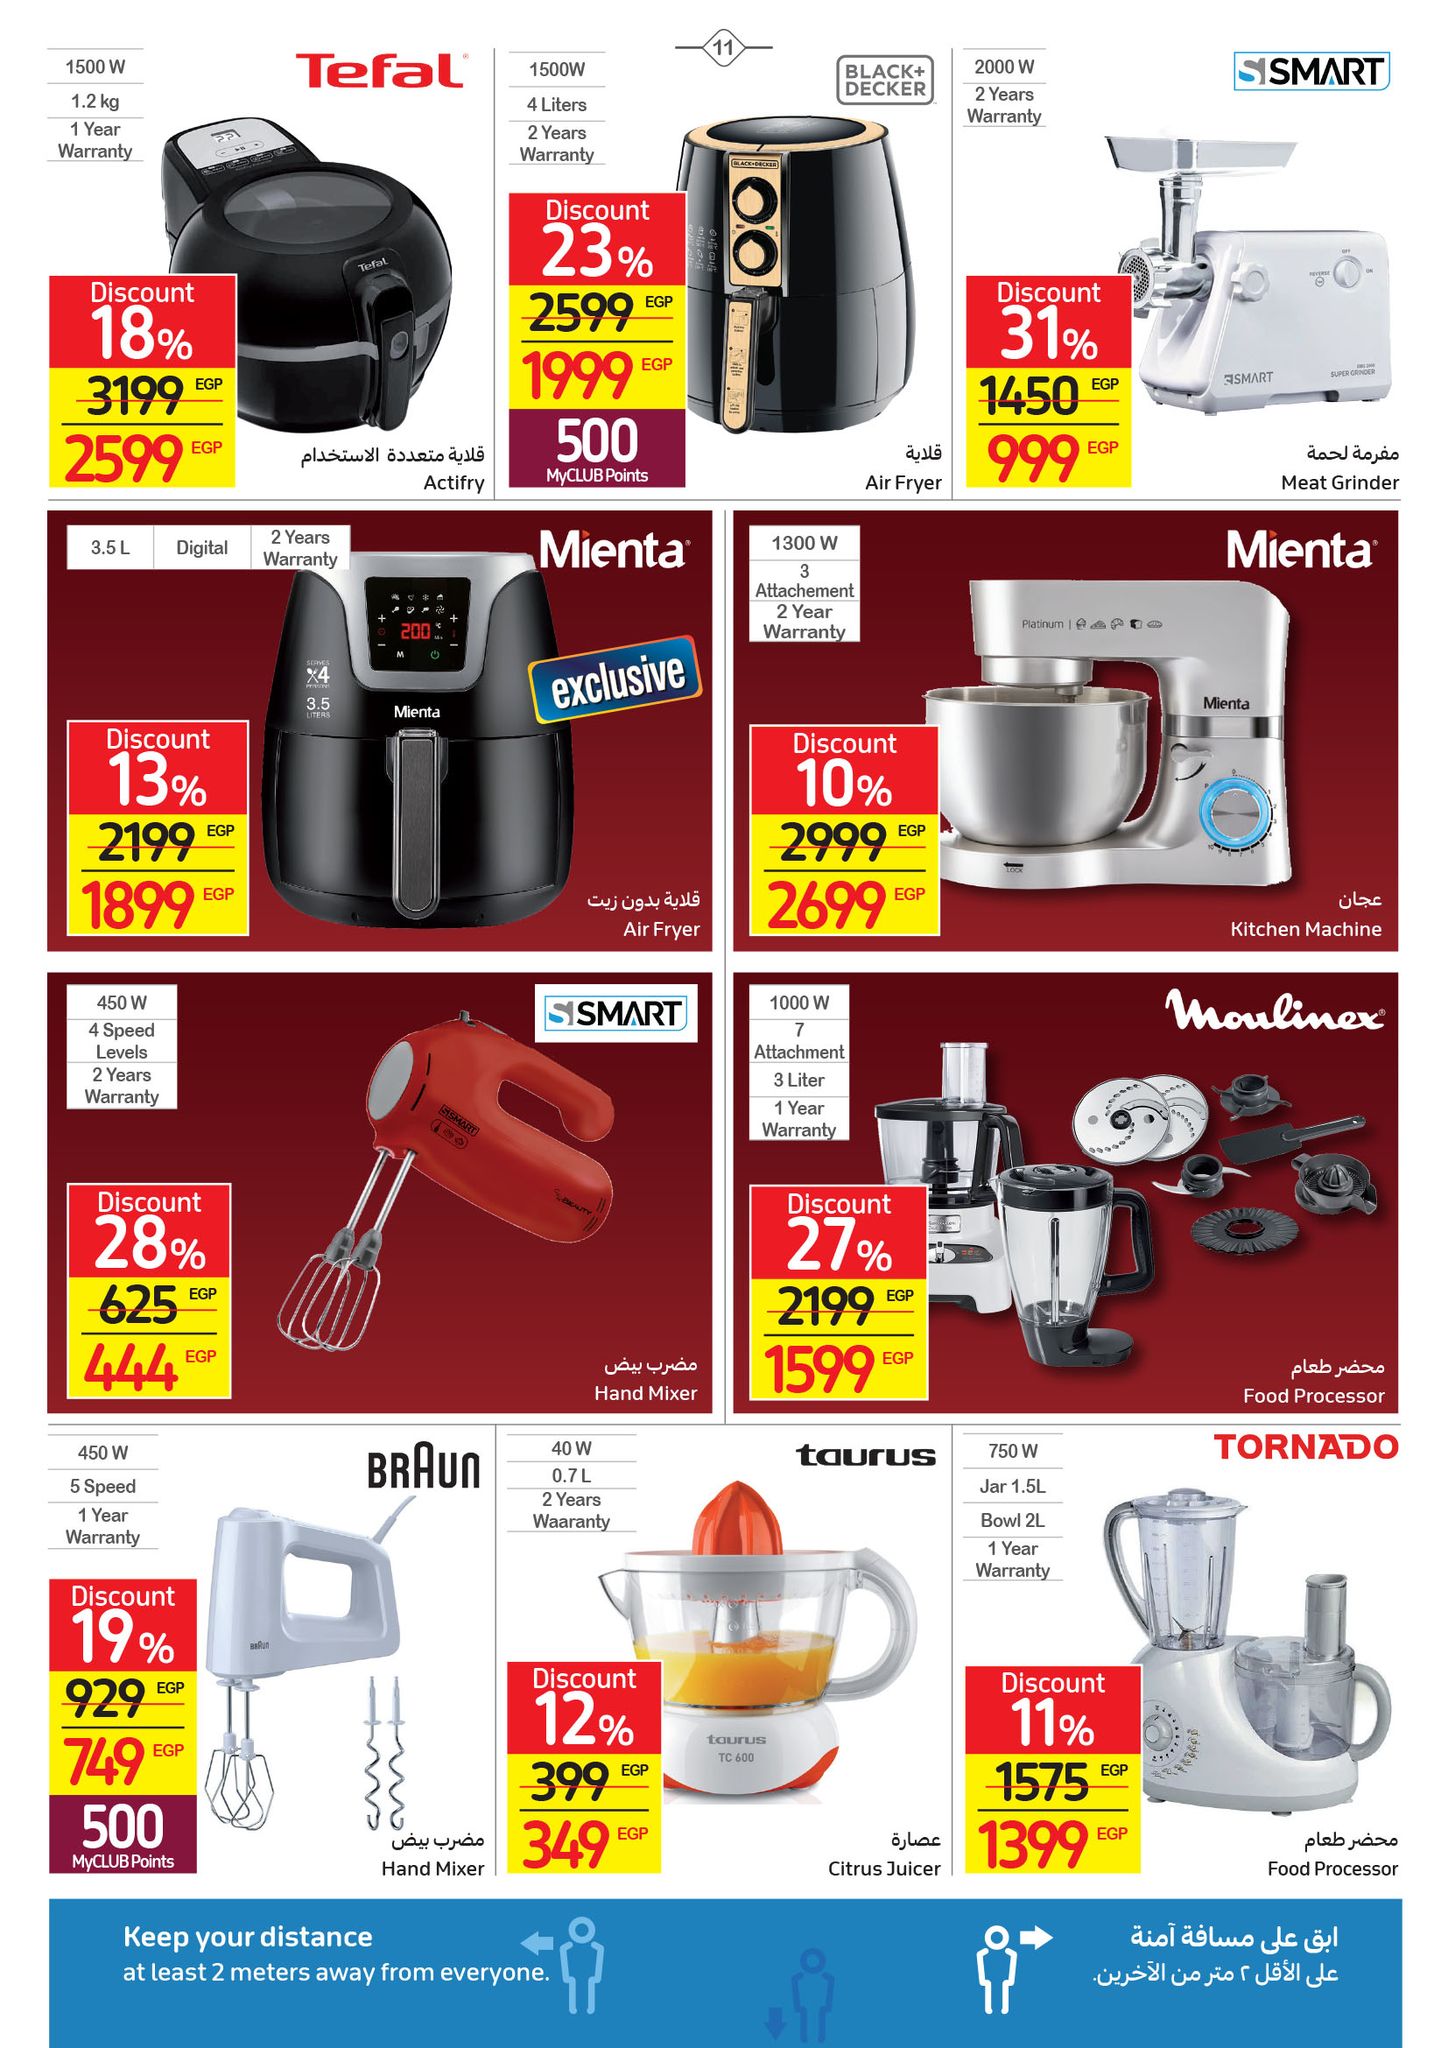 Watch the latest Carrefour half price offers "Last Chance Offer" until December 4, 11